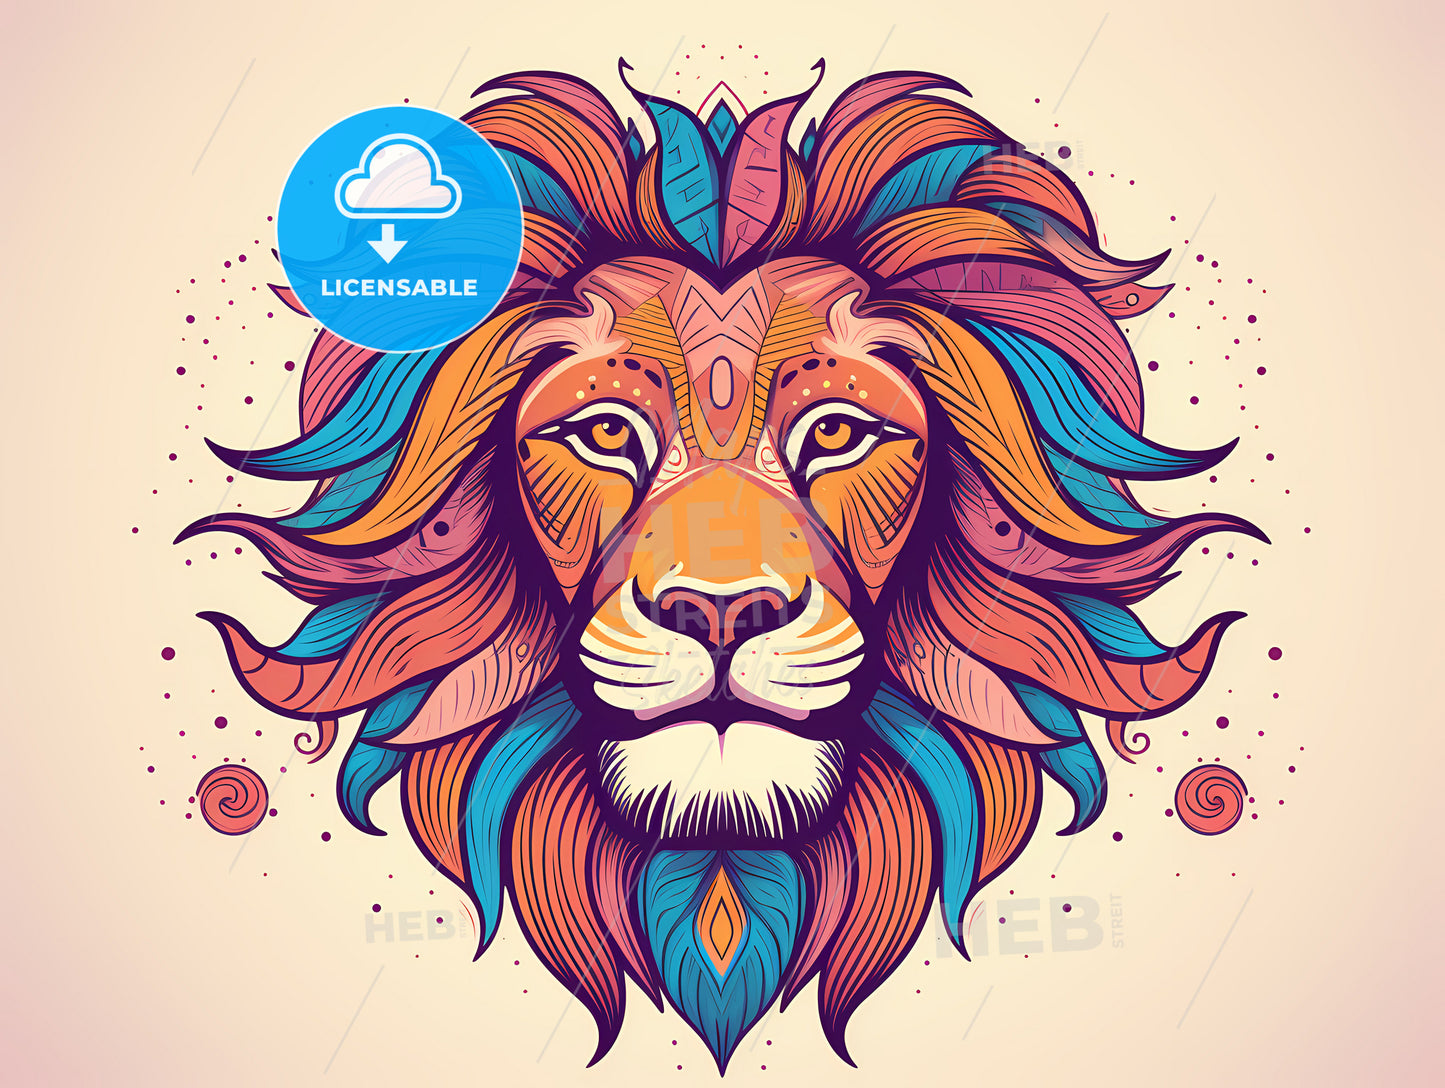 A Colorful Lion With Ornate Mane